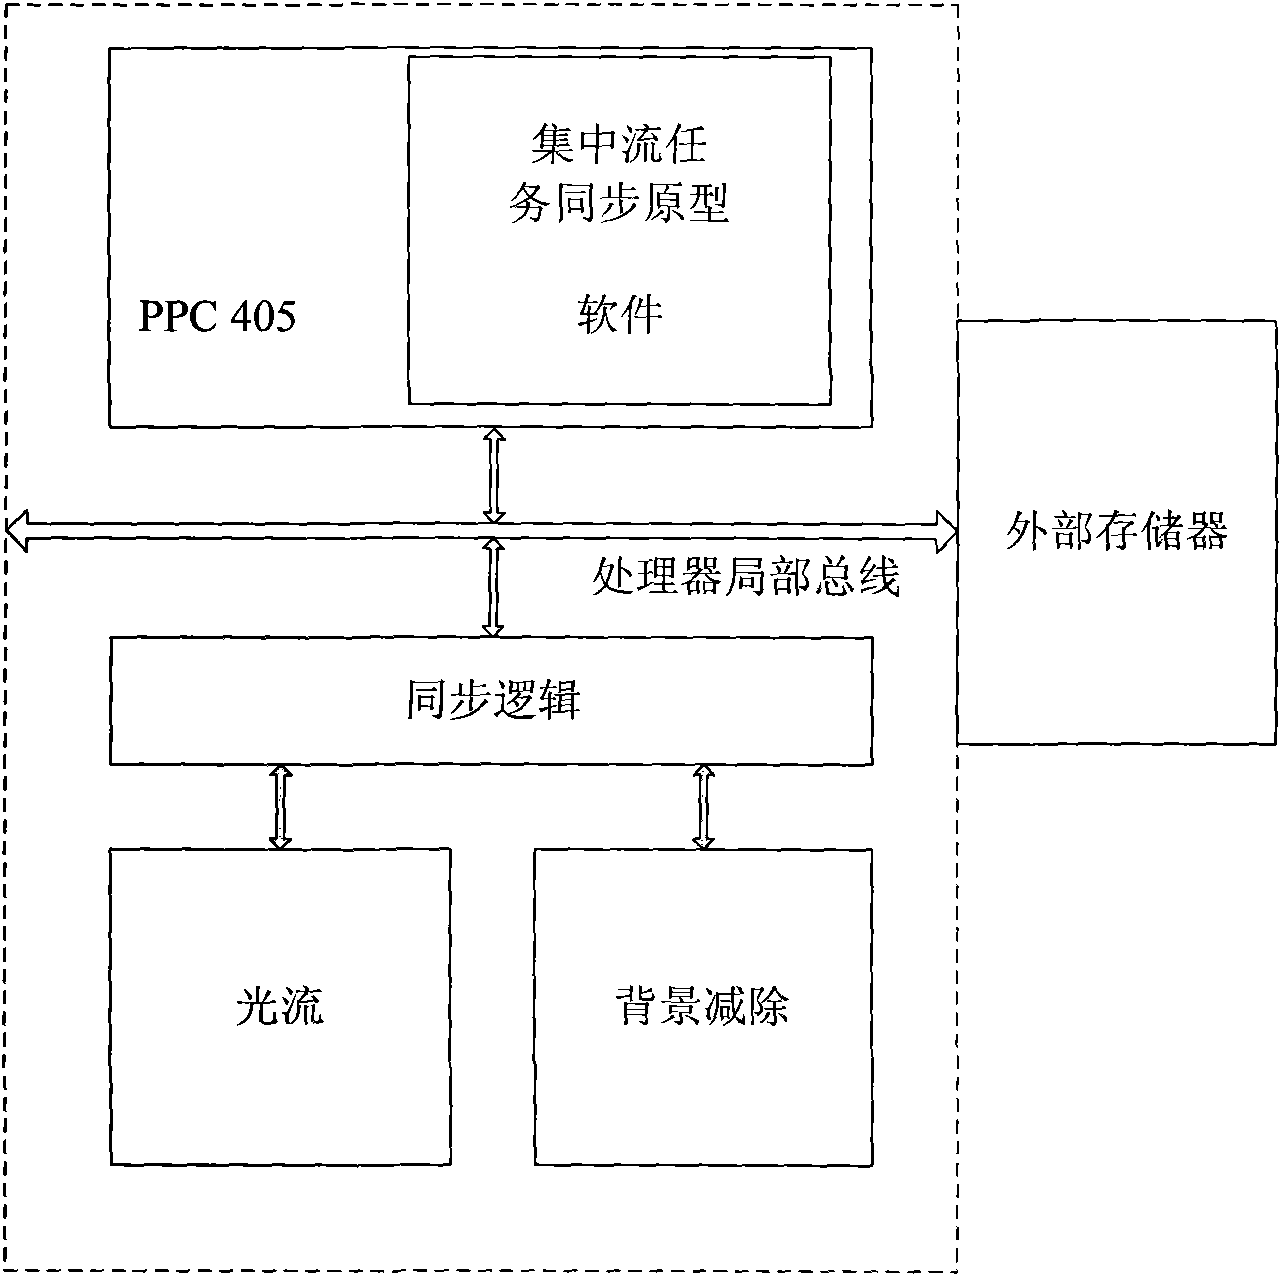 Dual-bus visual processing chip architecture